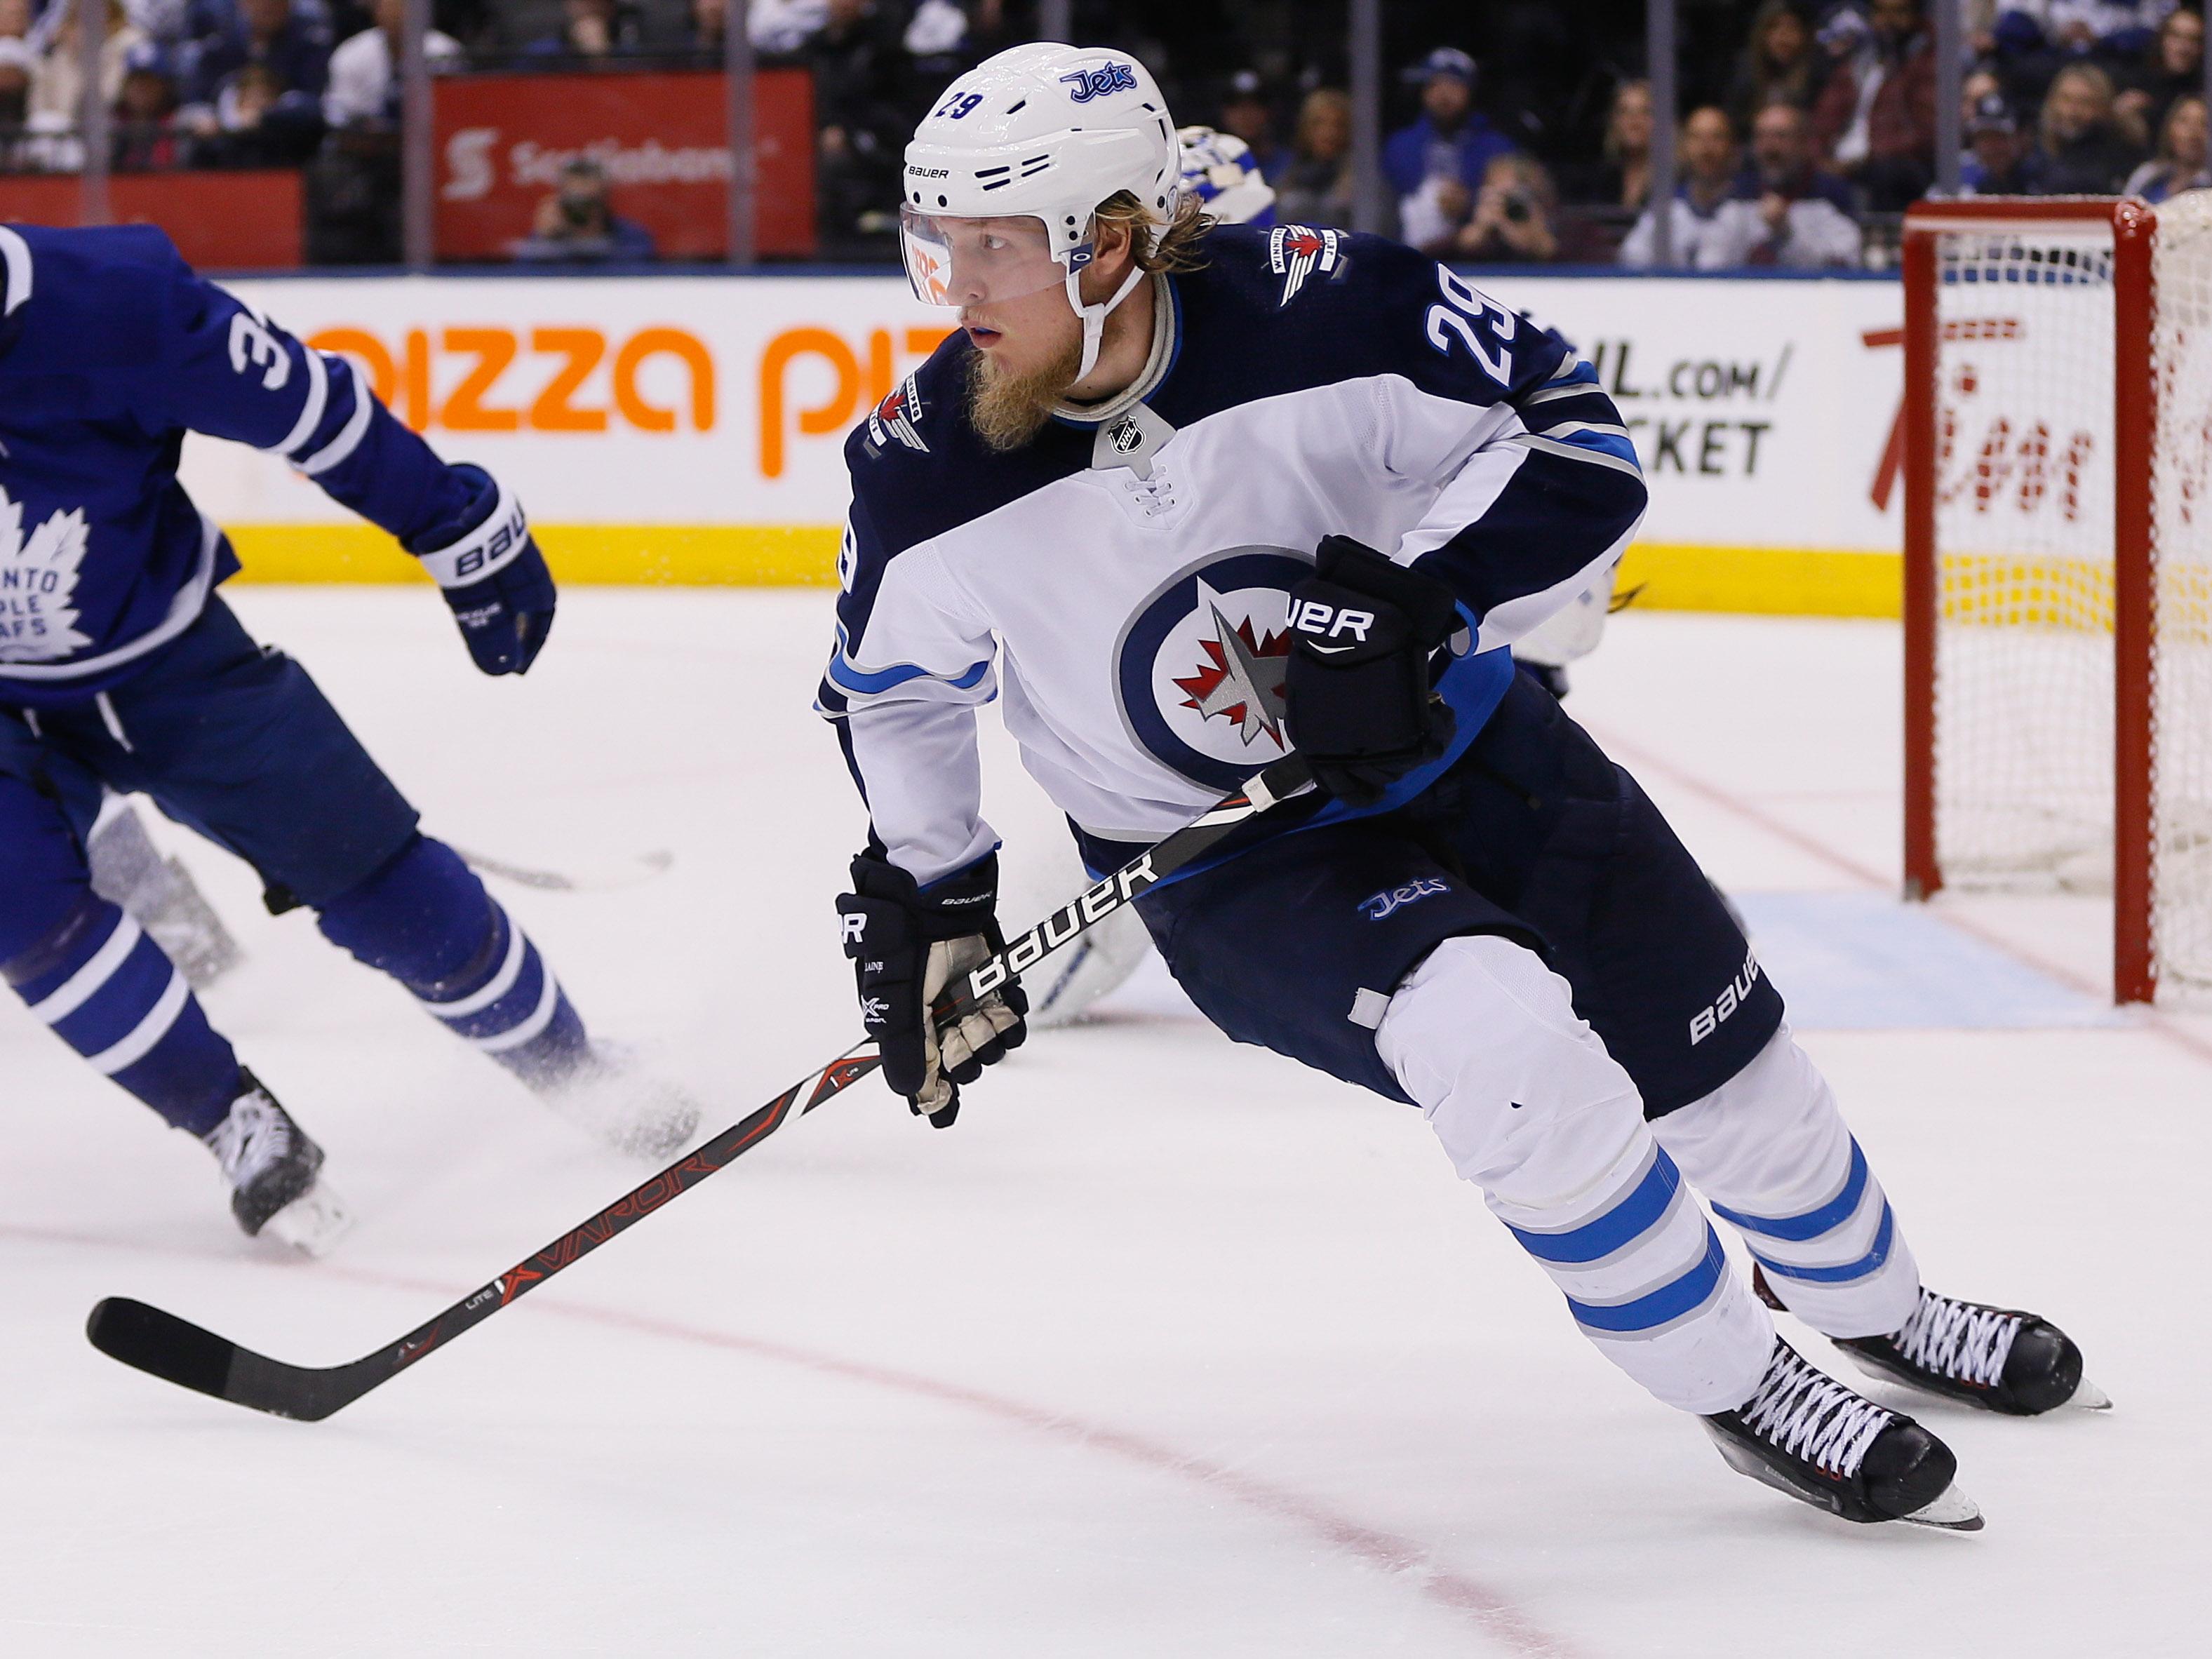 Eddie Olczyk believes Patrik Laine could score 65 to 70 goals in a